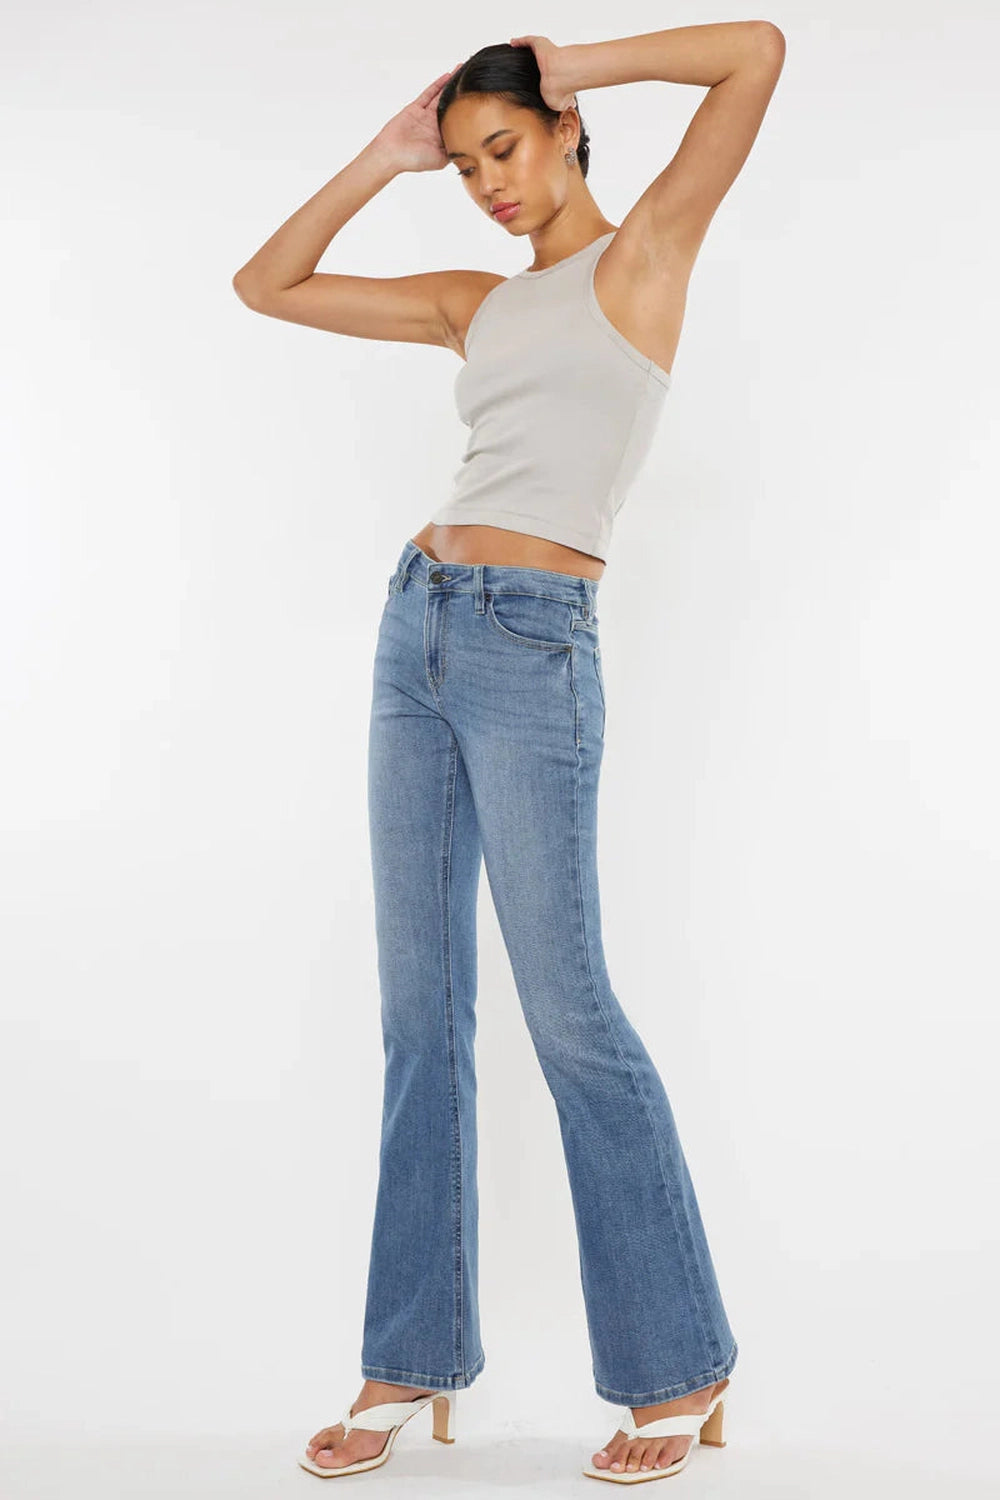 Women Light Wash High Rise Flare Jeans